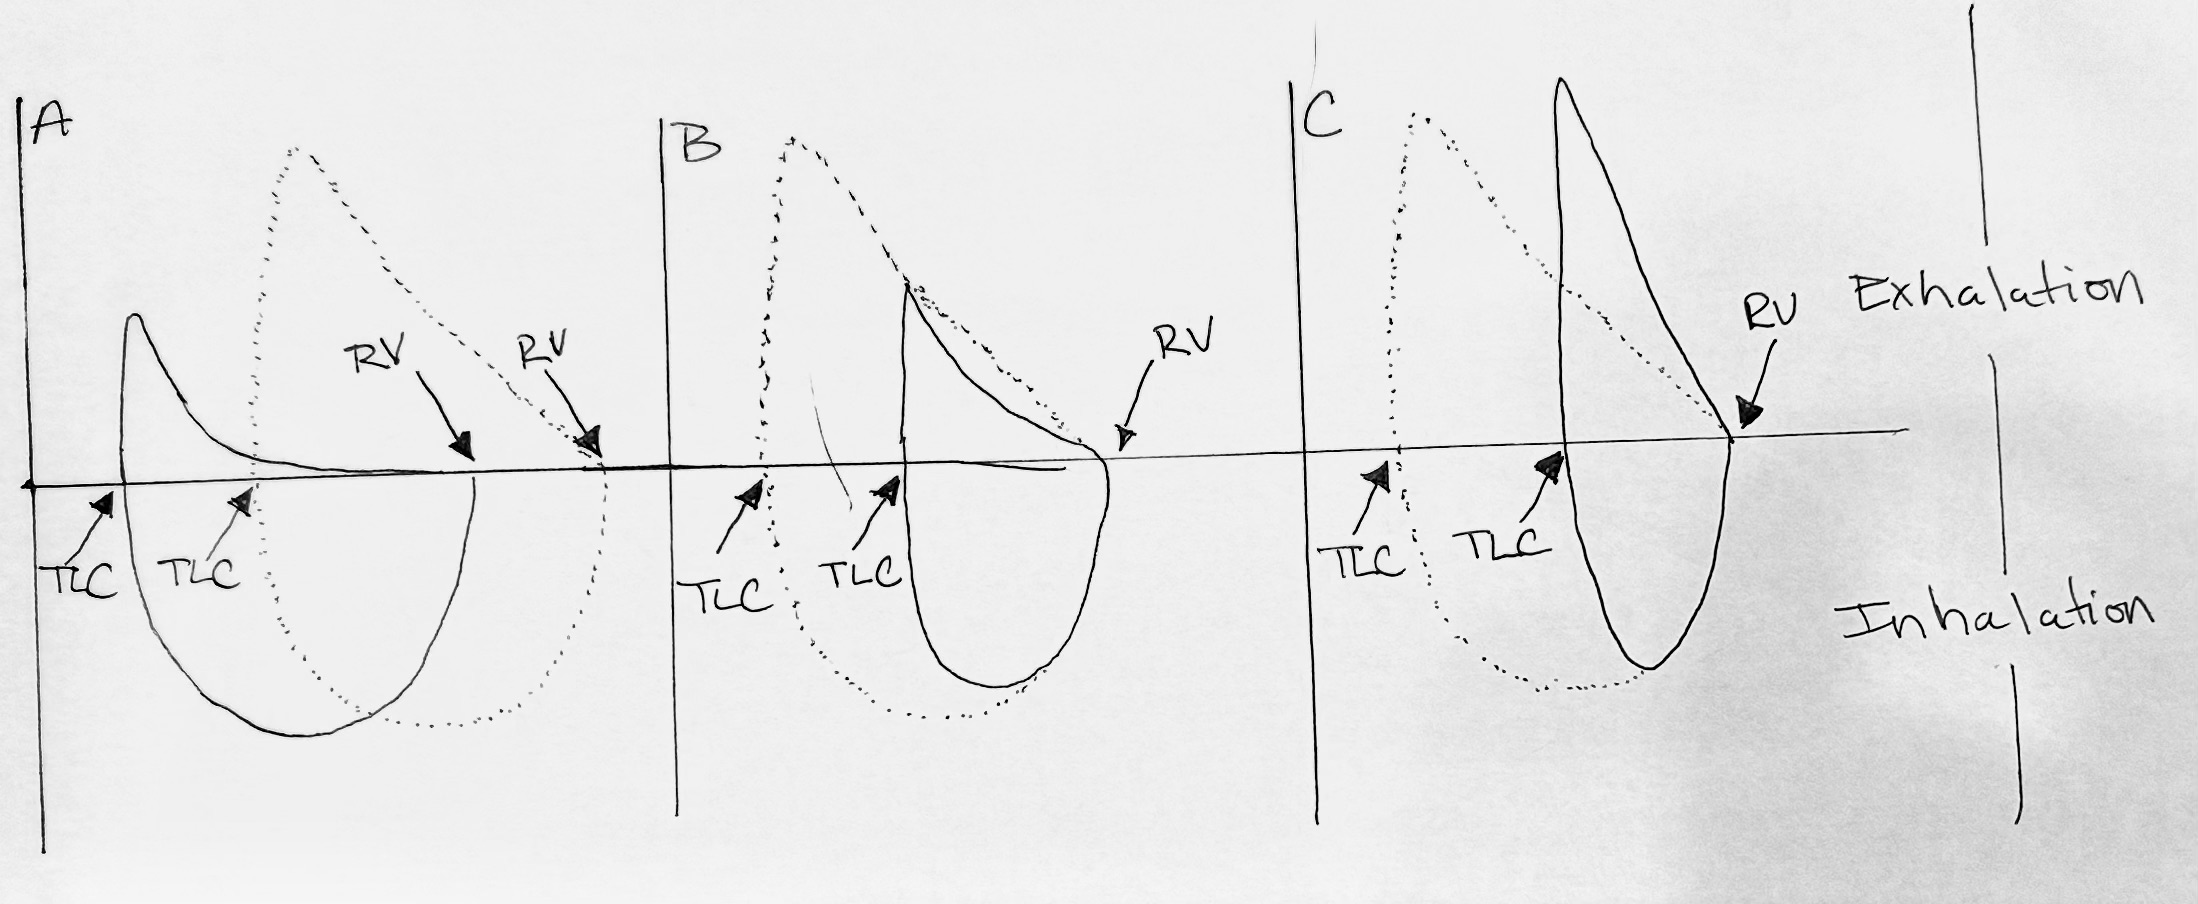 Flow-volume loop and volume time graph of pulmonary function test.